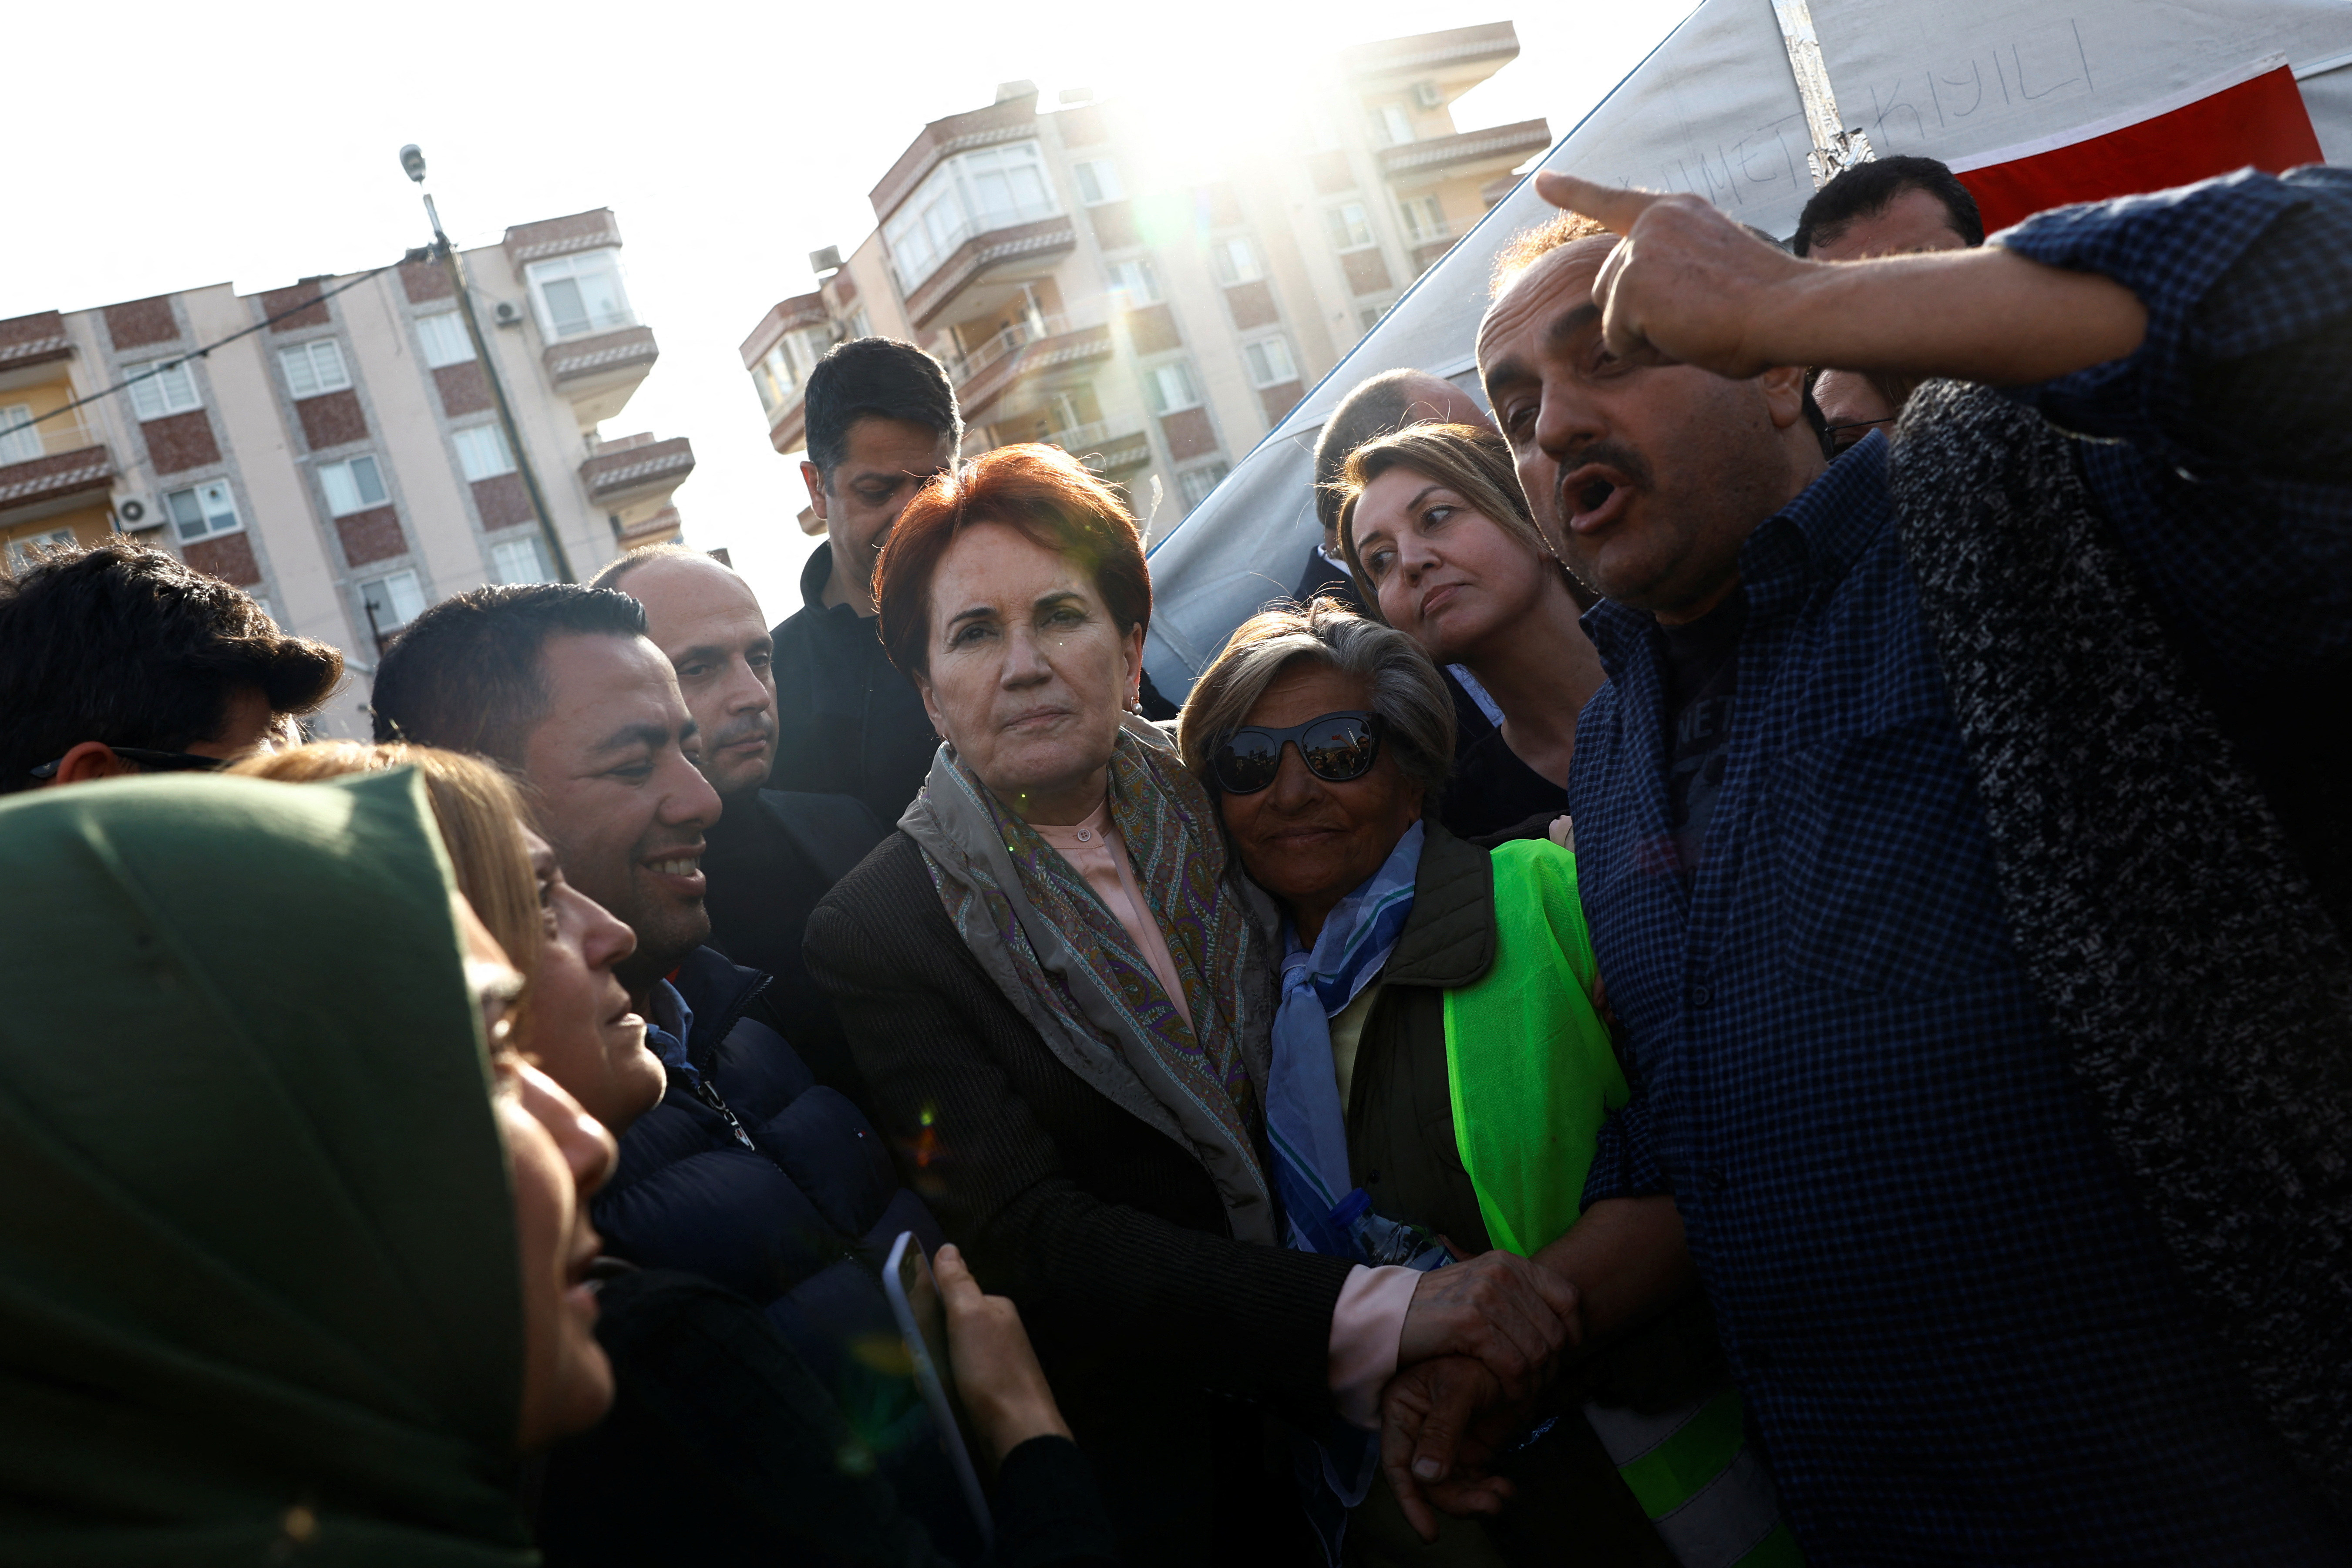 Meral Aksener, leader of IYI (Good) Party, visits earthquake survivors living in tents in Iskenderun